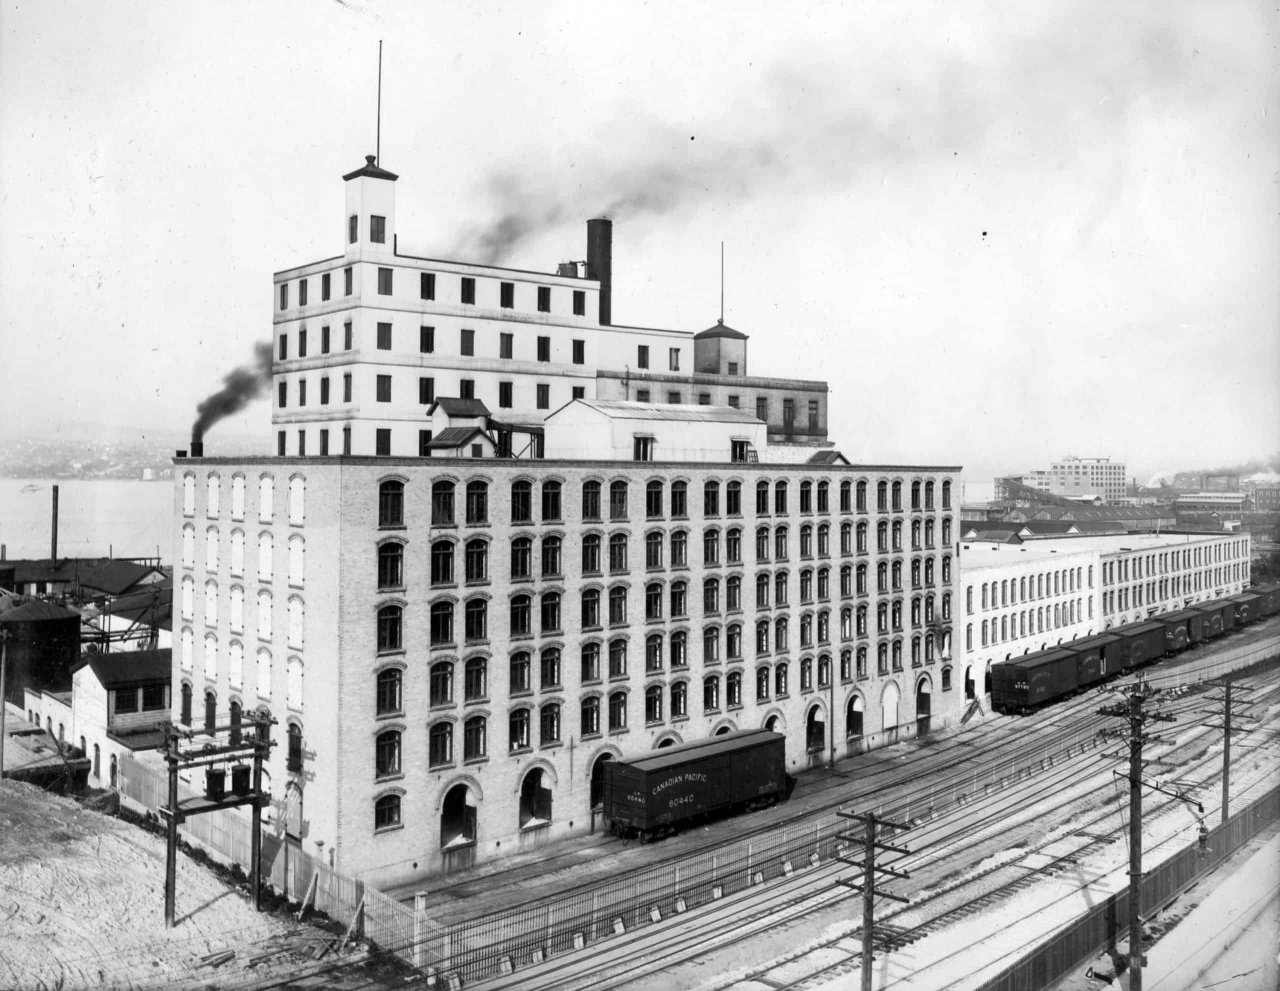 B.C. Sugar refinery building in the 1910s. Source City of Vancouver Archives M-11-65.